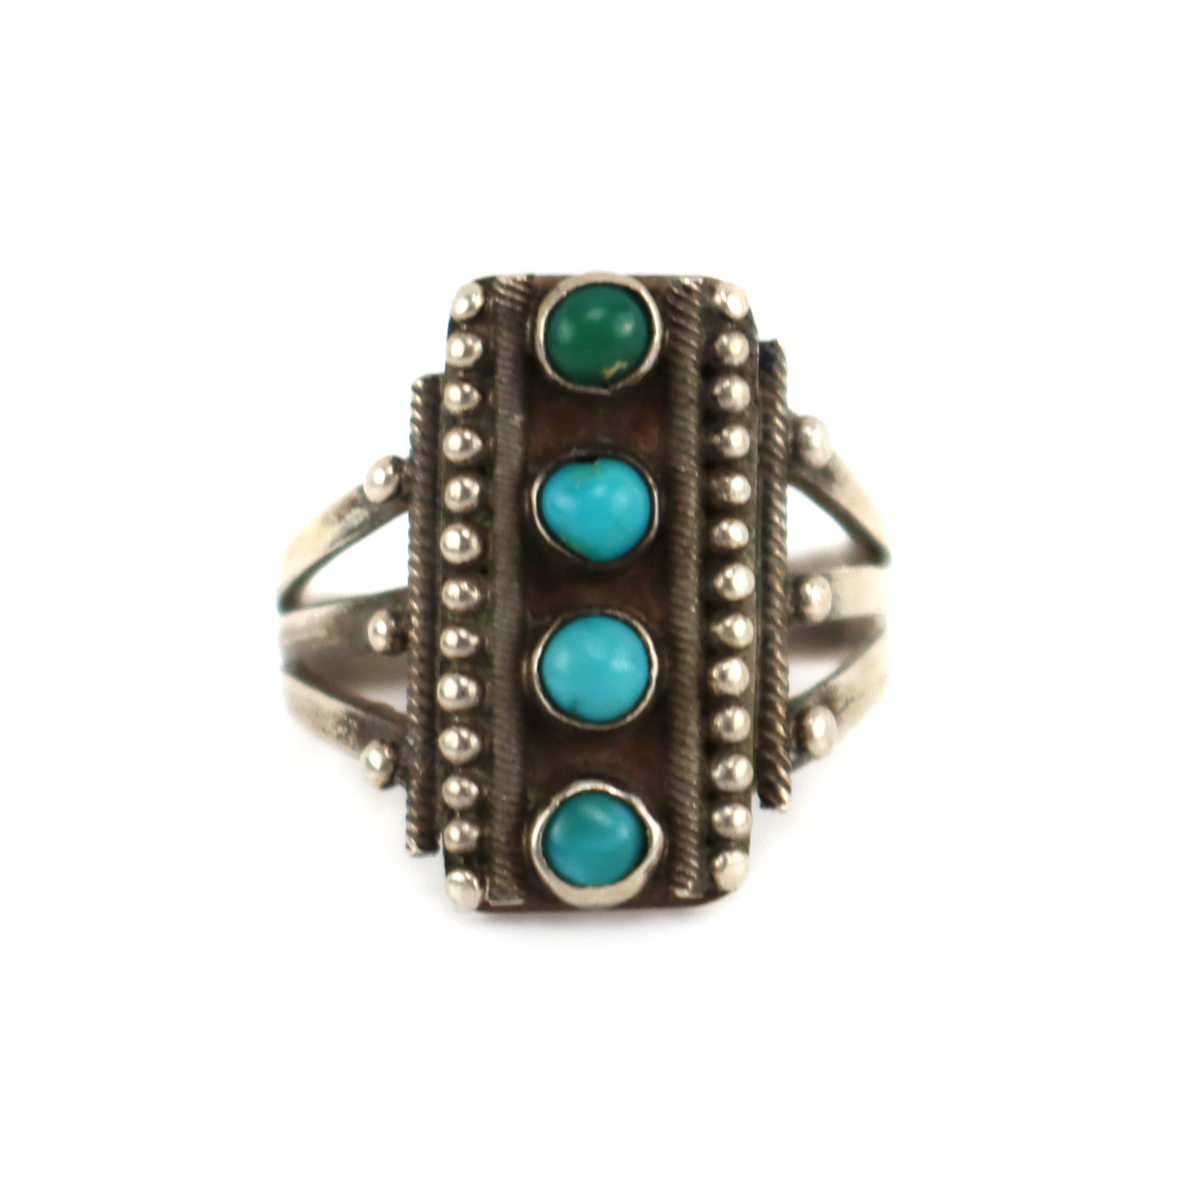 Zuni - Turquoise and Silver Ring c. 1940s, size 6 (J16028-018)